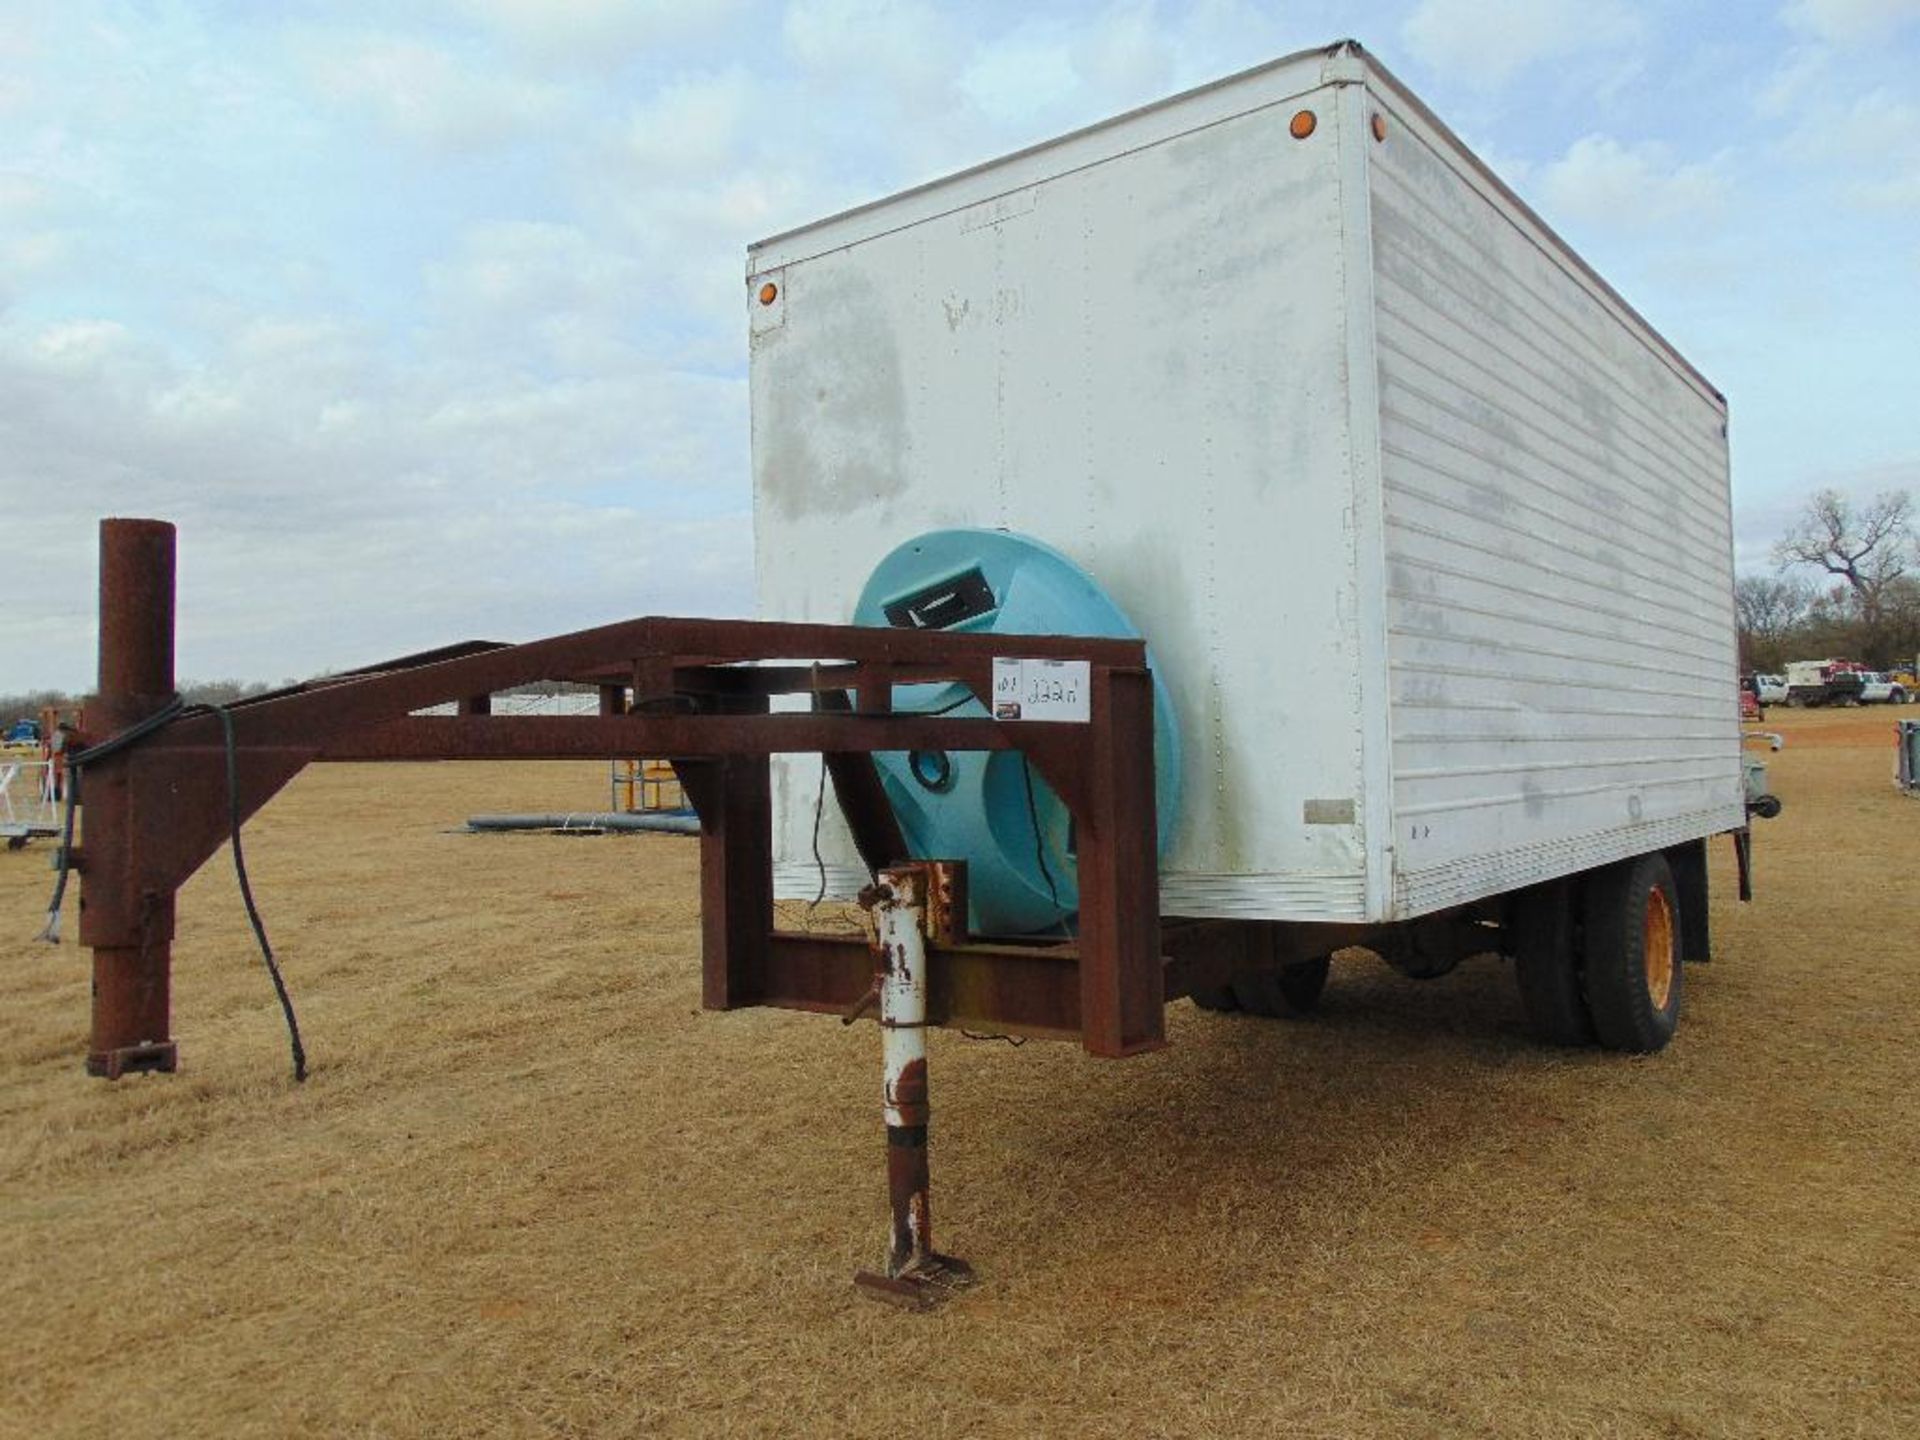 S/A Gooseneck 21' Trailer Frame w/ Pike Enclosed Box, (Bill of Sale) - Image 2 of 8